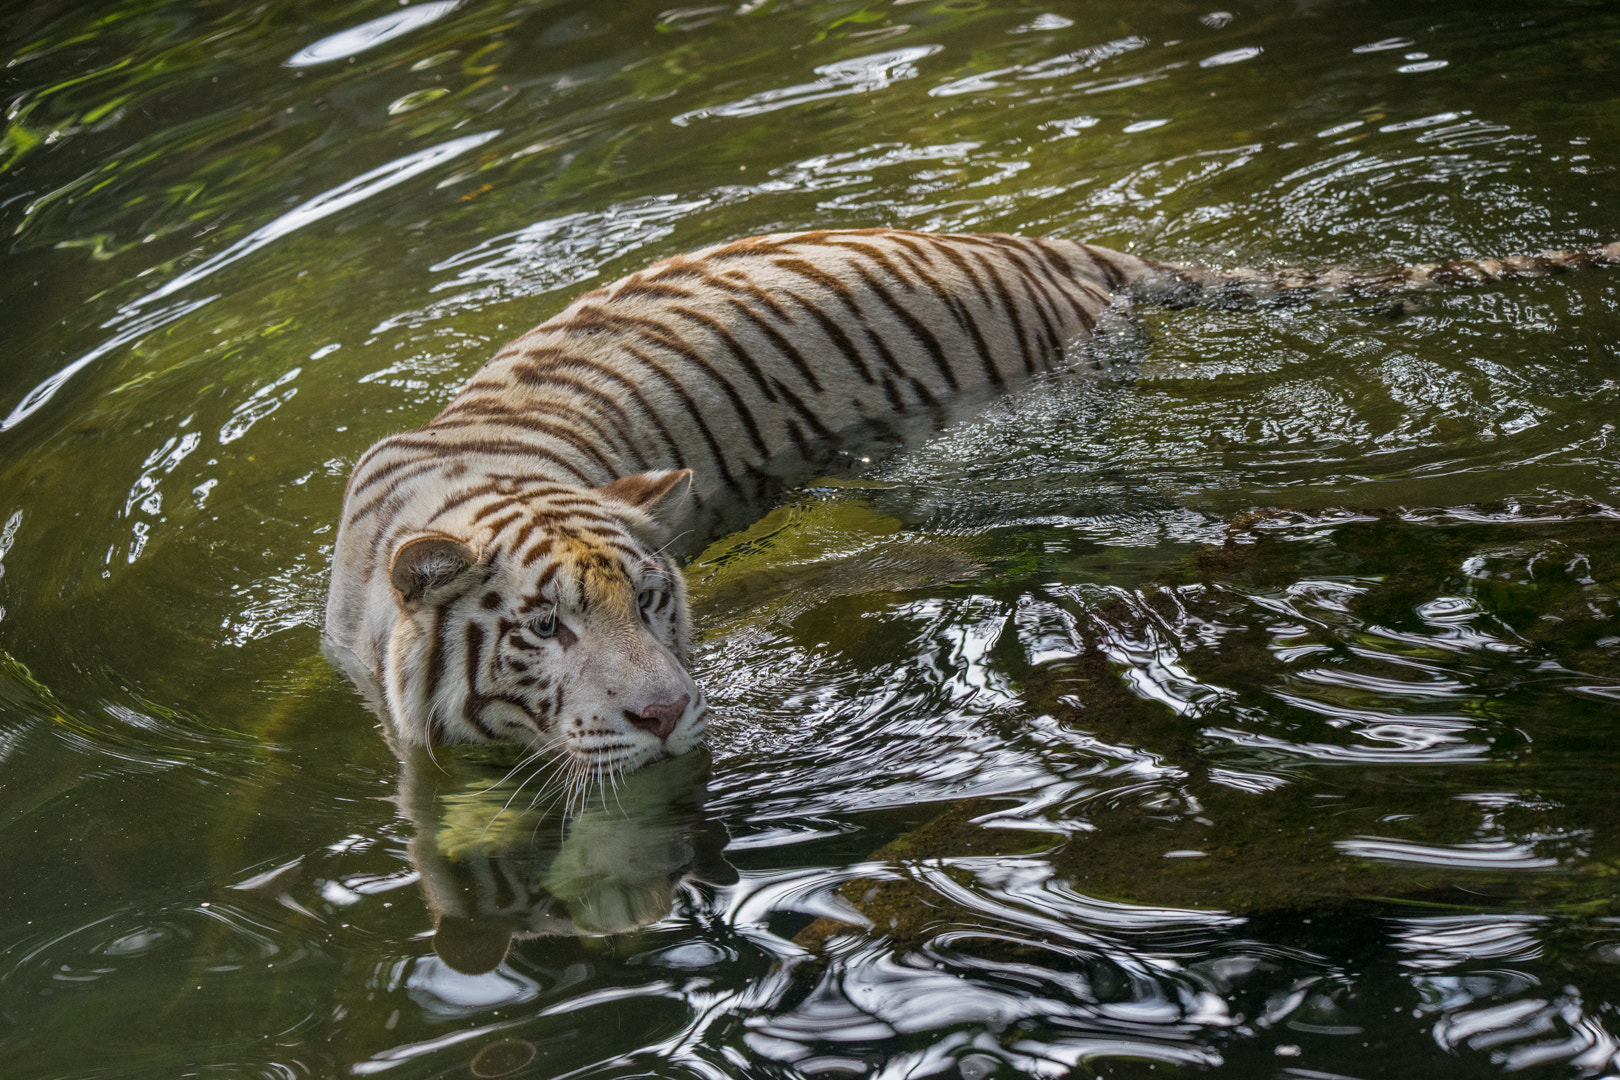 Sony a7 II + Tamron SP 150-600mm F5-6.3 Di VC USD sample photo. White tiger in water photography